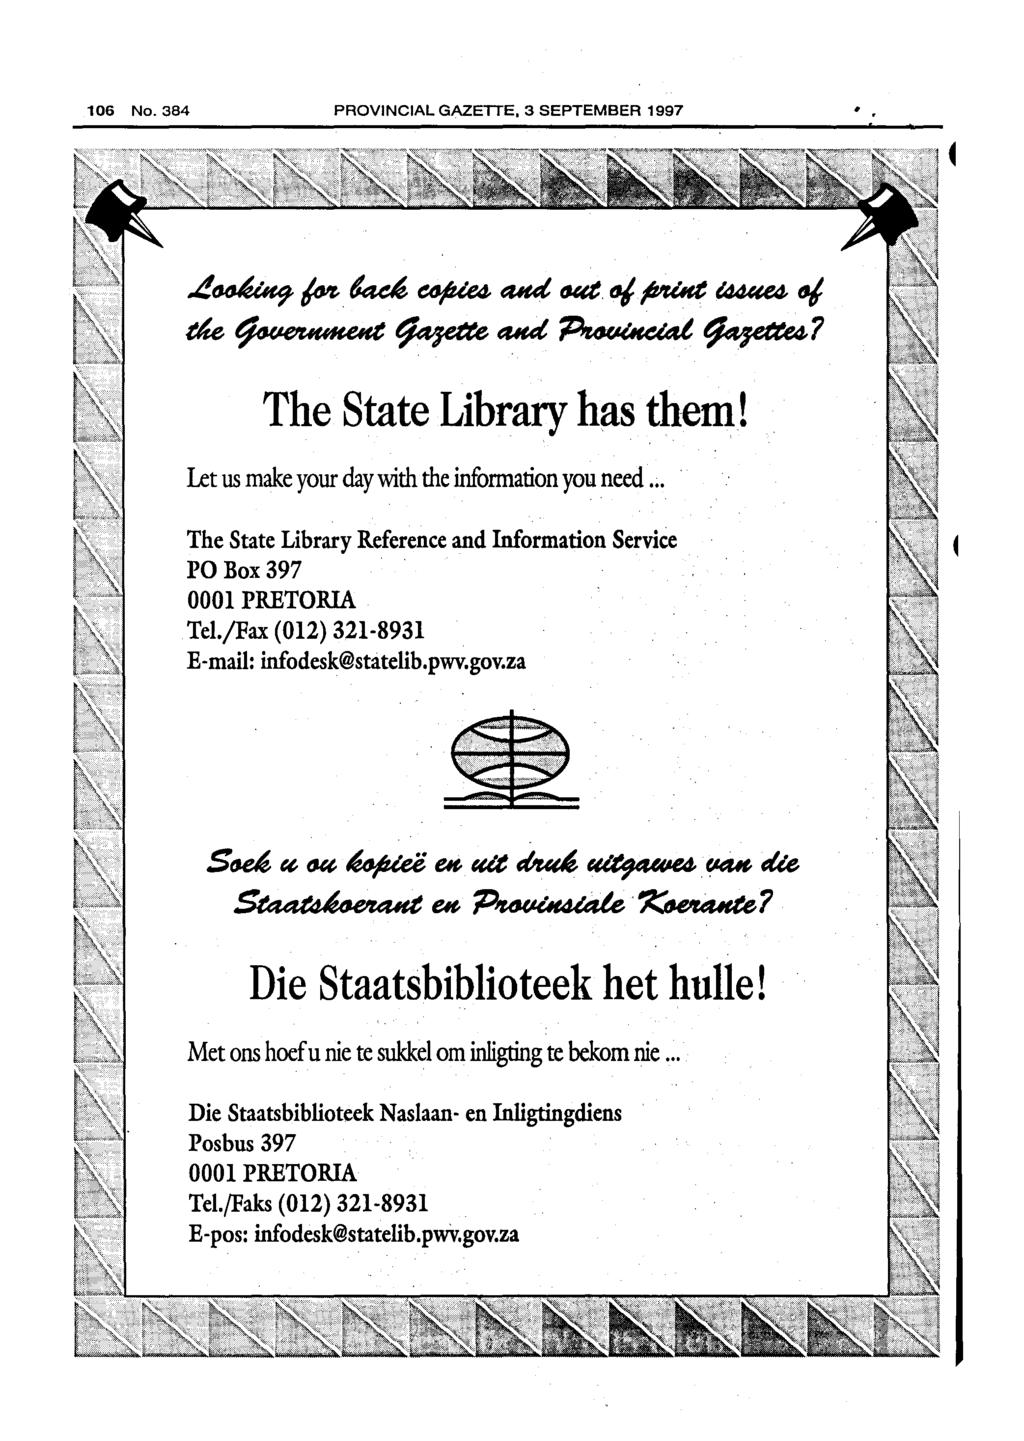 106 No. PROVINCIAL GAZETTE, 3 SEPTEMBER 1997 ~~ /M-. d4c~ ~ ad. tutt. fl/.ft'uht l44«e4- t1j. tm~~ad.~~~ The State Library has them! Let us make your day with the infonnation you need.